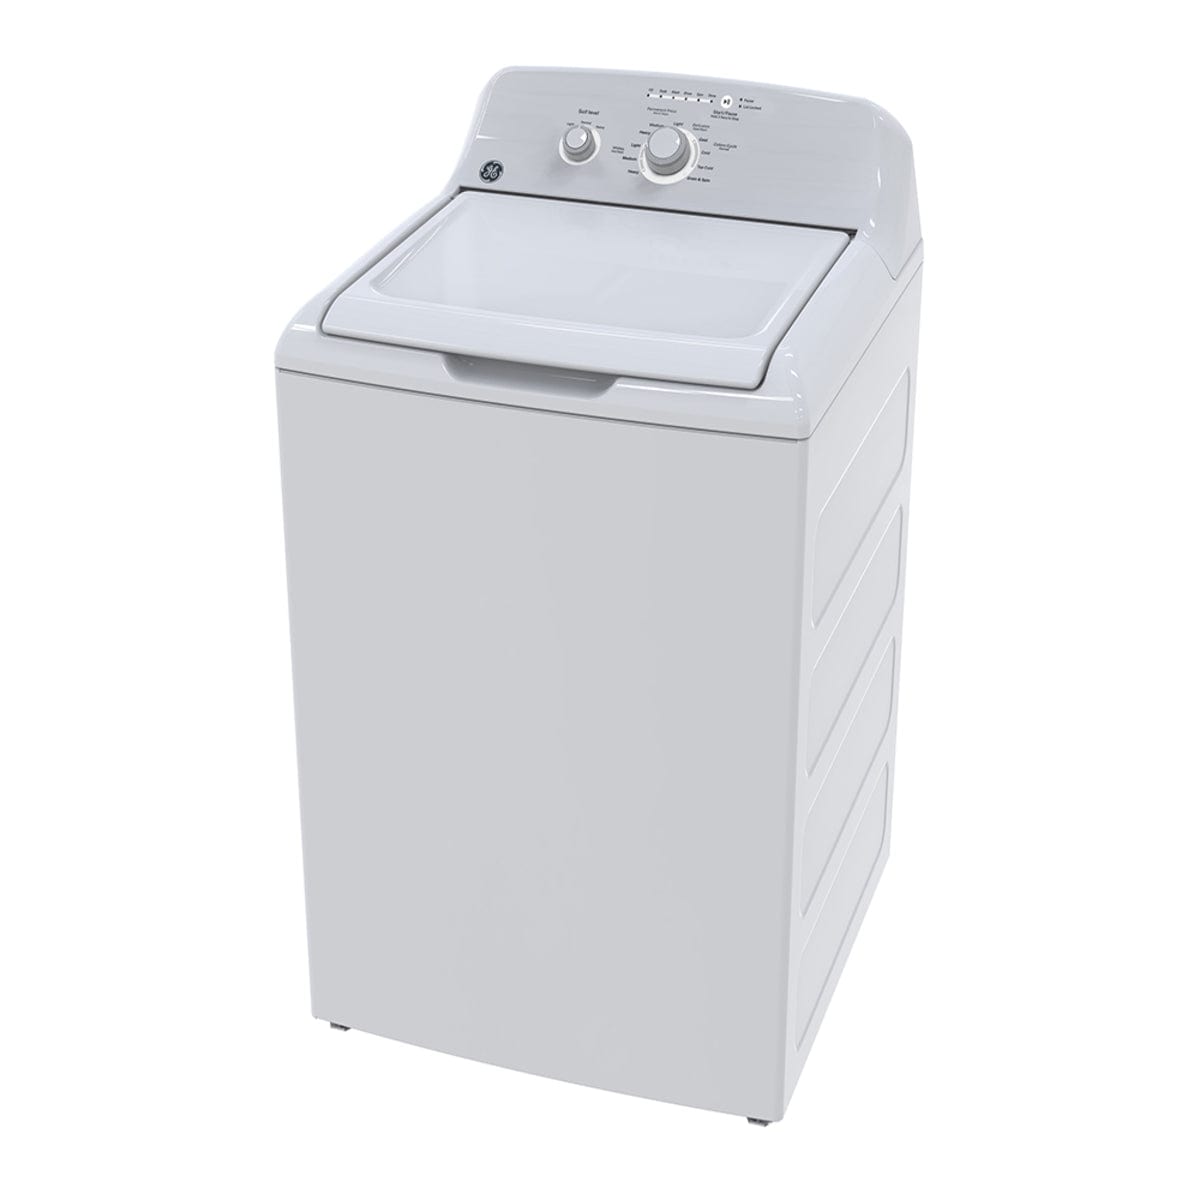 GE 27 Inch 4.4 cu. ft. Top Load Washer High Efficiency in White Model # GTW302BMPWW